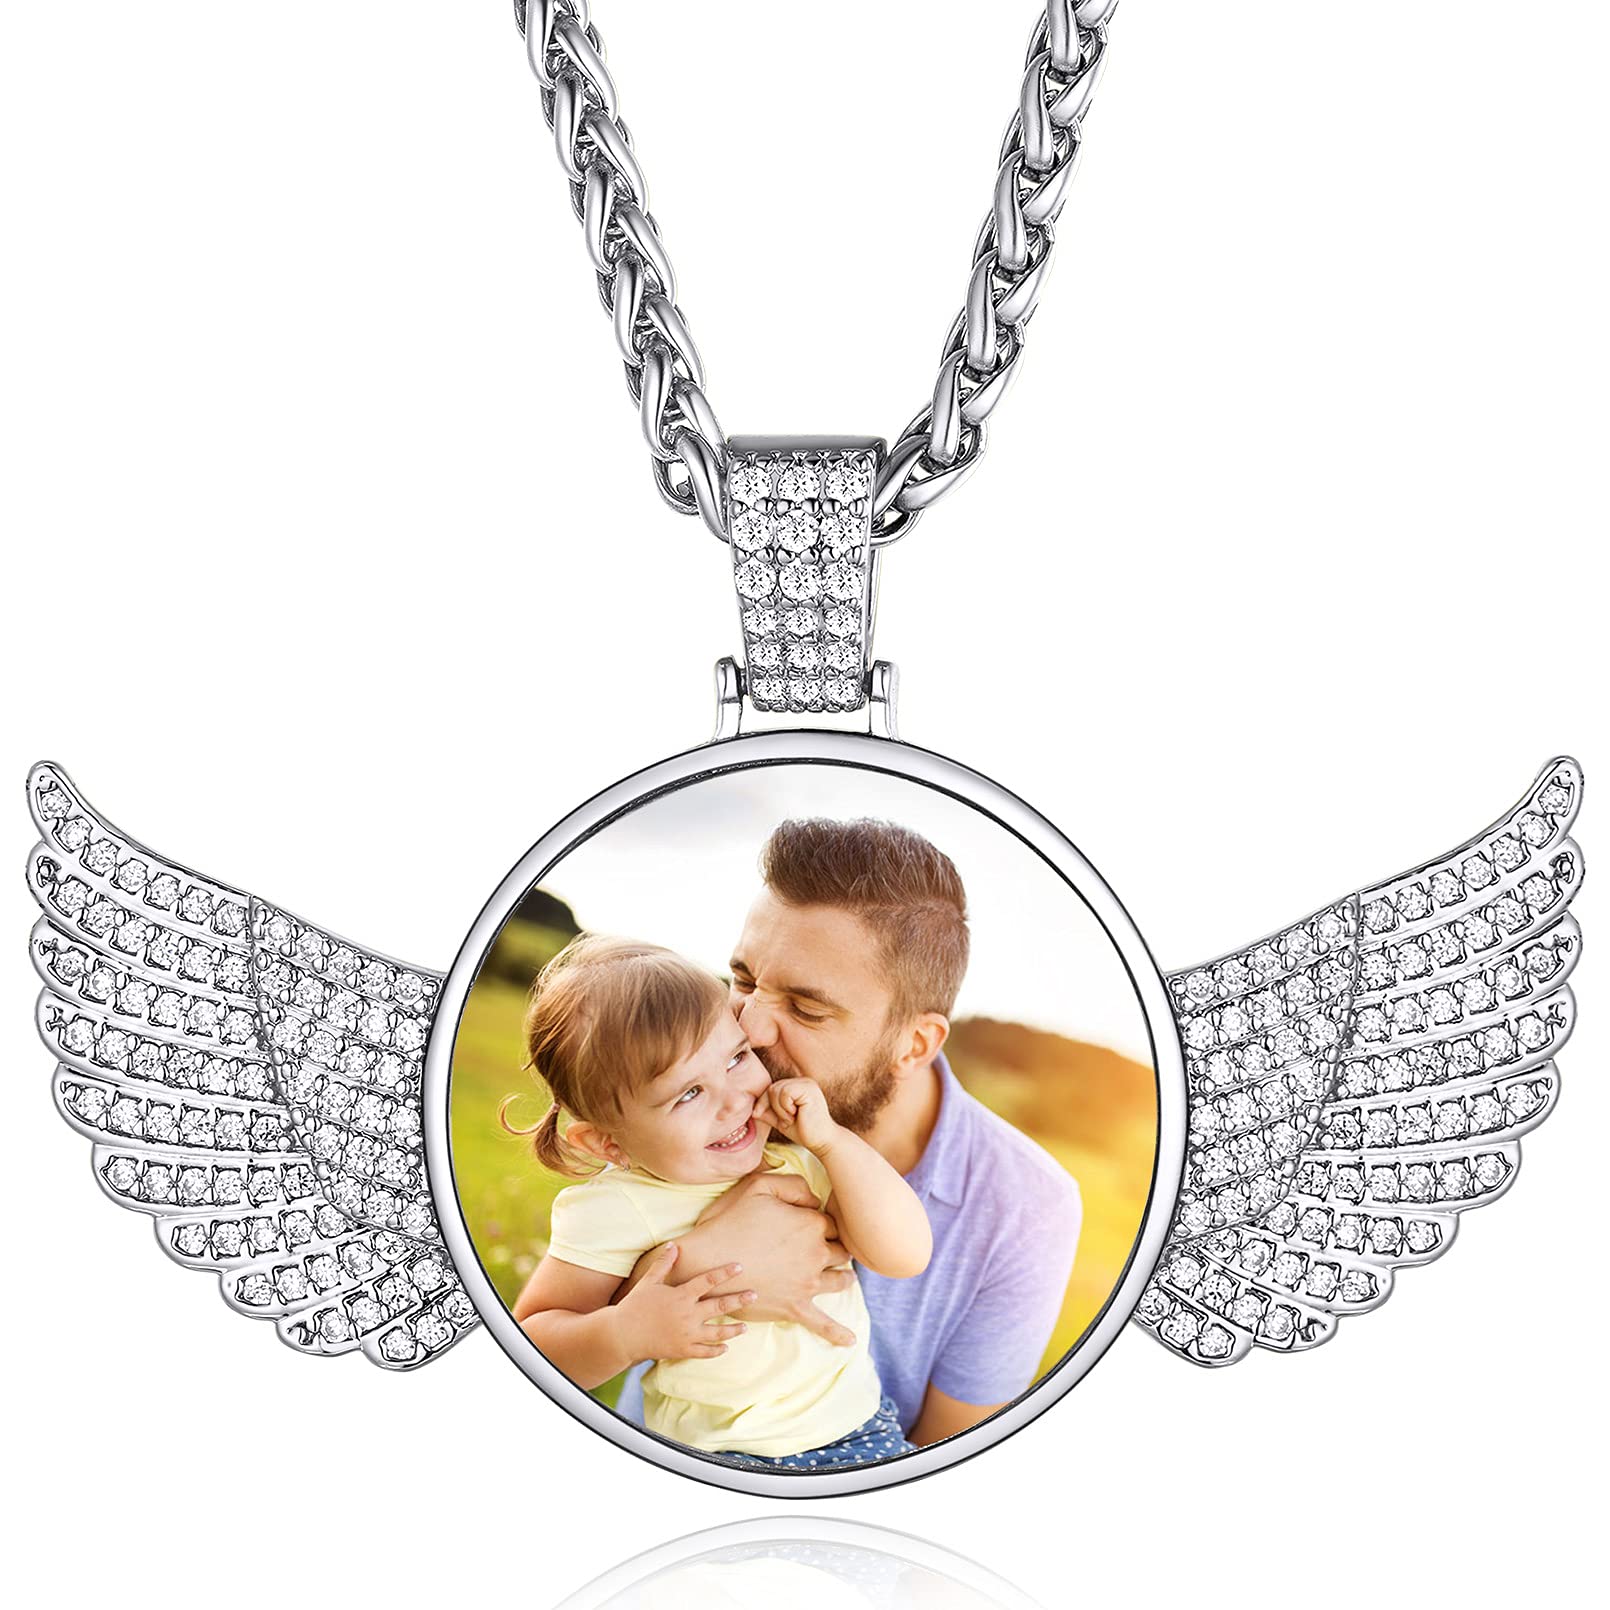 Custom4U Picture Necklace Personalized Photo for Men Women 18K Gold Plated/Black AAA CZ Angel Wings/Heart Medallion Customized Photo Memory Iced Out Pendant Chain 18-30 Inches,Hip Hop Jewelry+Gift Box